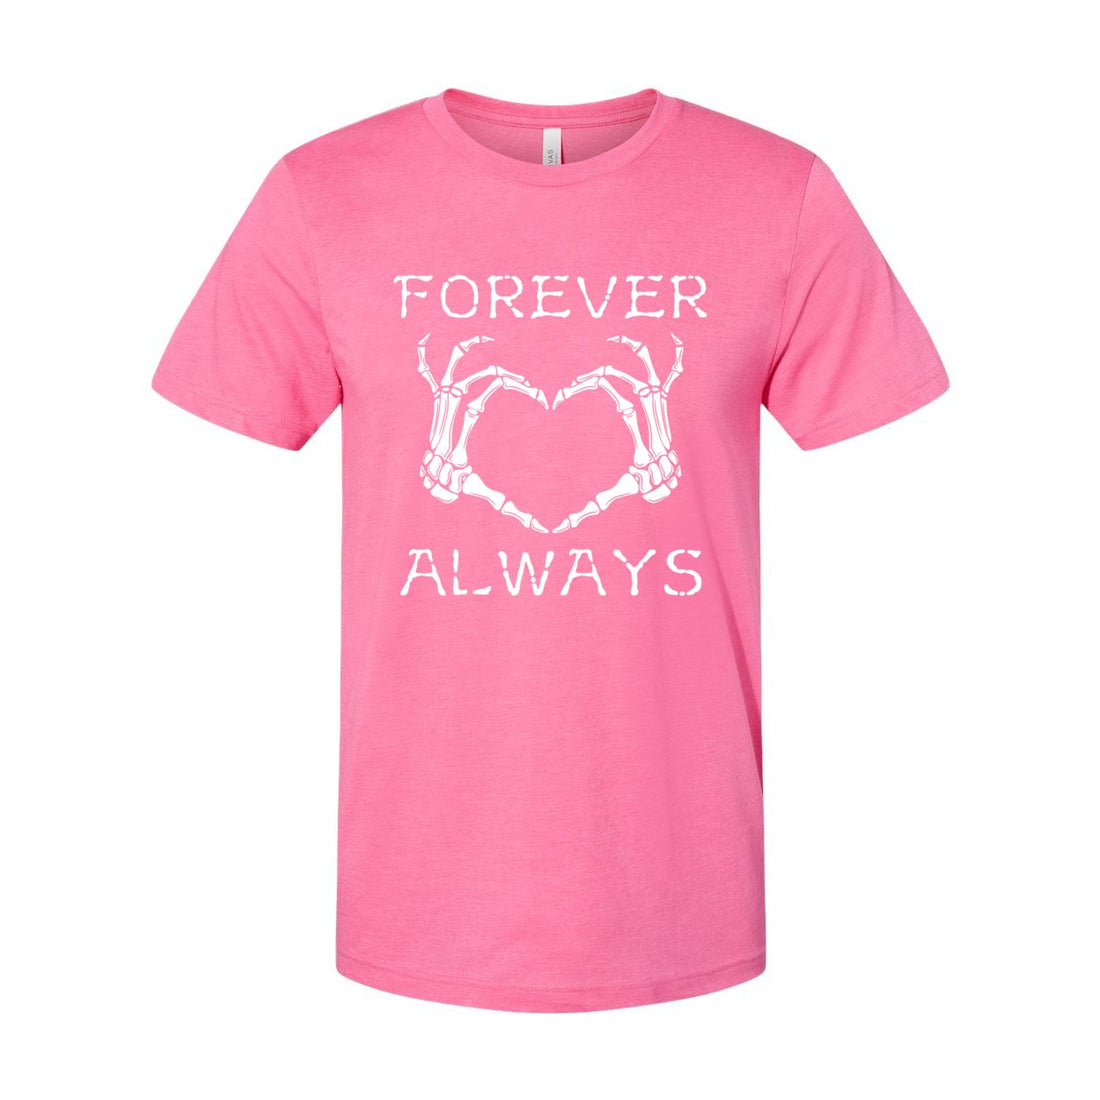 Forever and Always Sleeve Jersey Tee - T-Shirts - Positively Sassy - Forever and Always Sleeve Jersey Tee